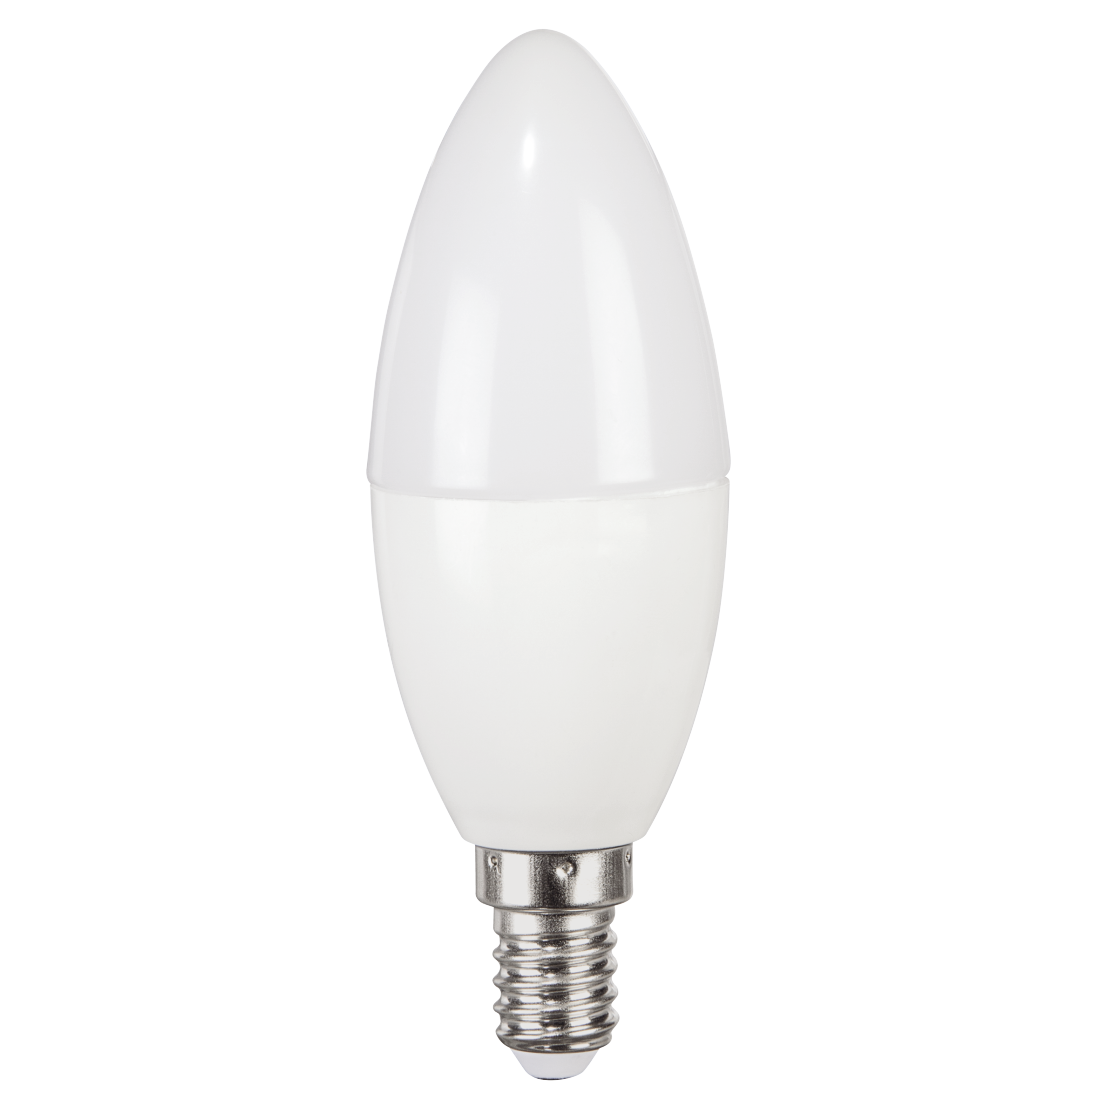 abx High-Res Image - Xavax, LED Bulb, E14, 806 lm Replaces 60W, Candle Bulb, warm white